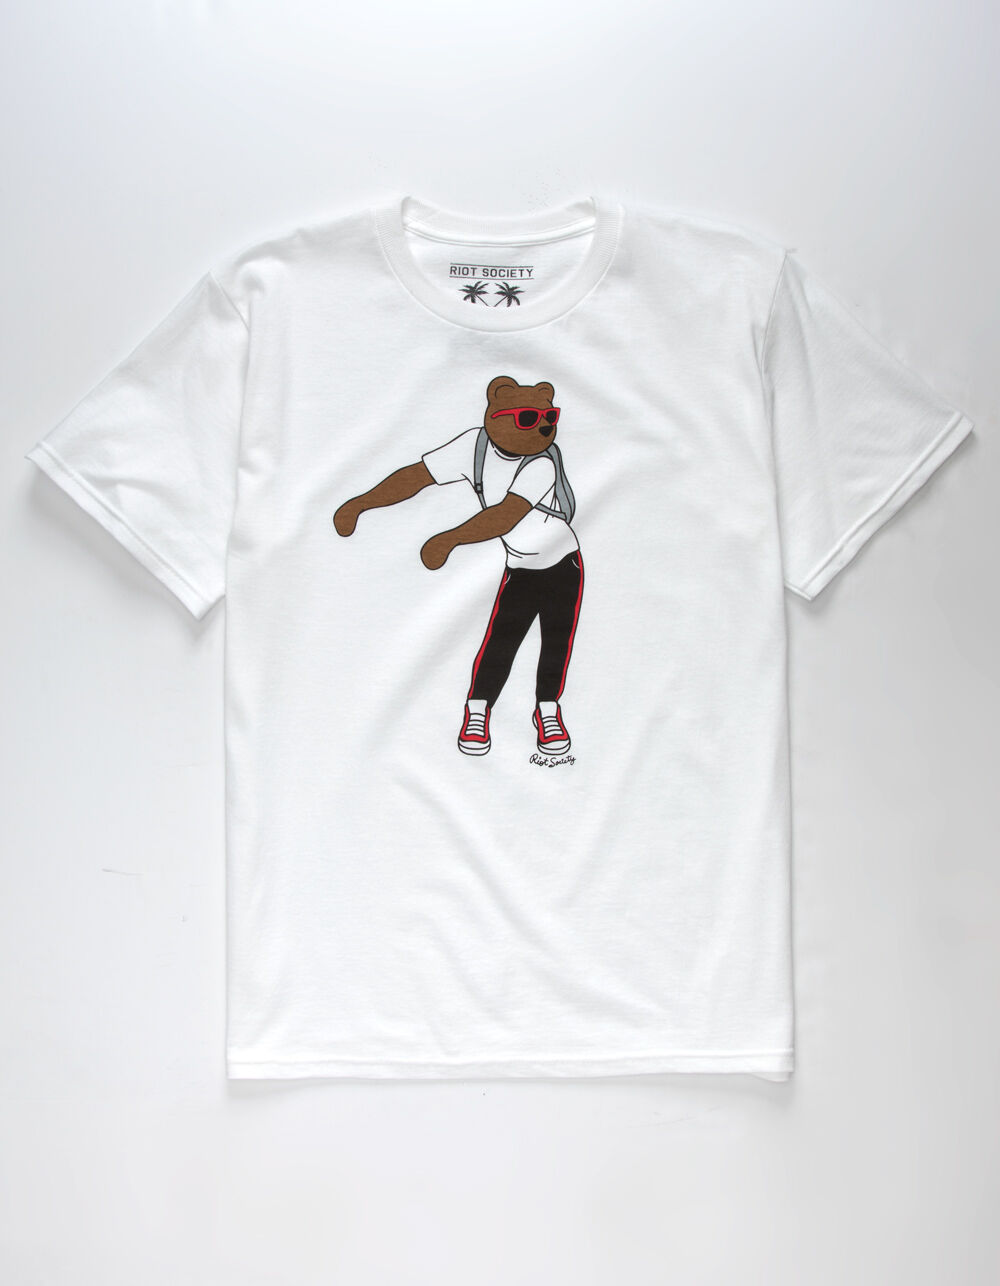 RIOT SOCIETY Flossin White Boys T-Shirt image number 0